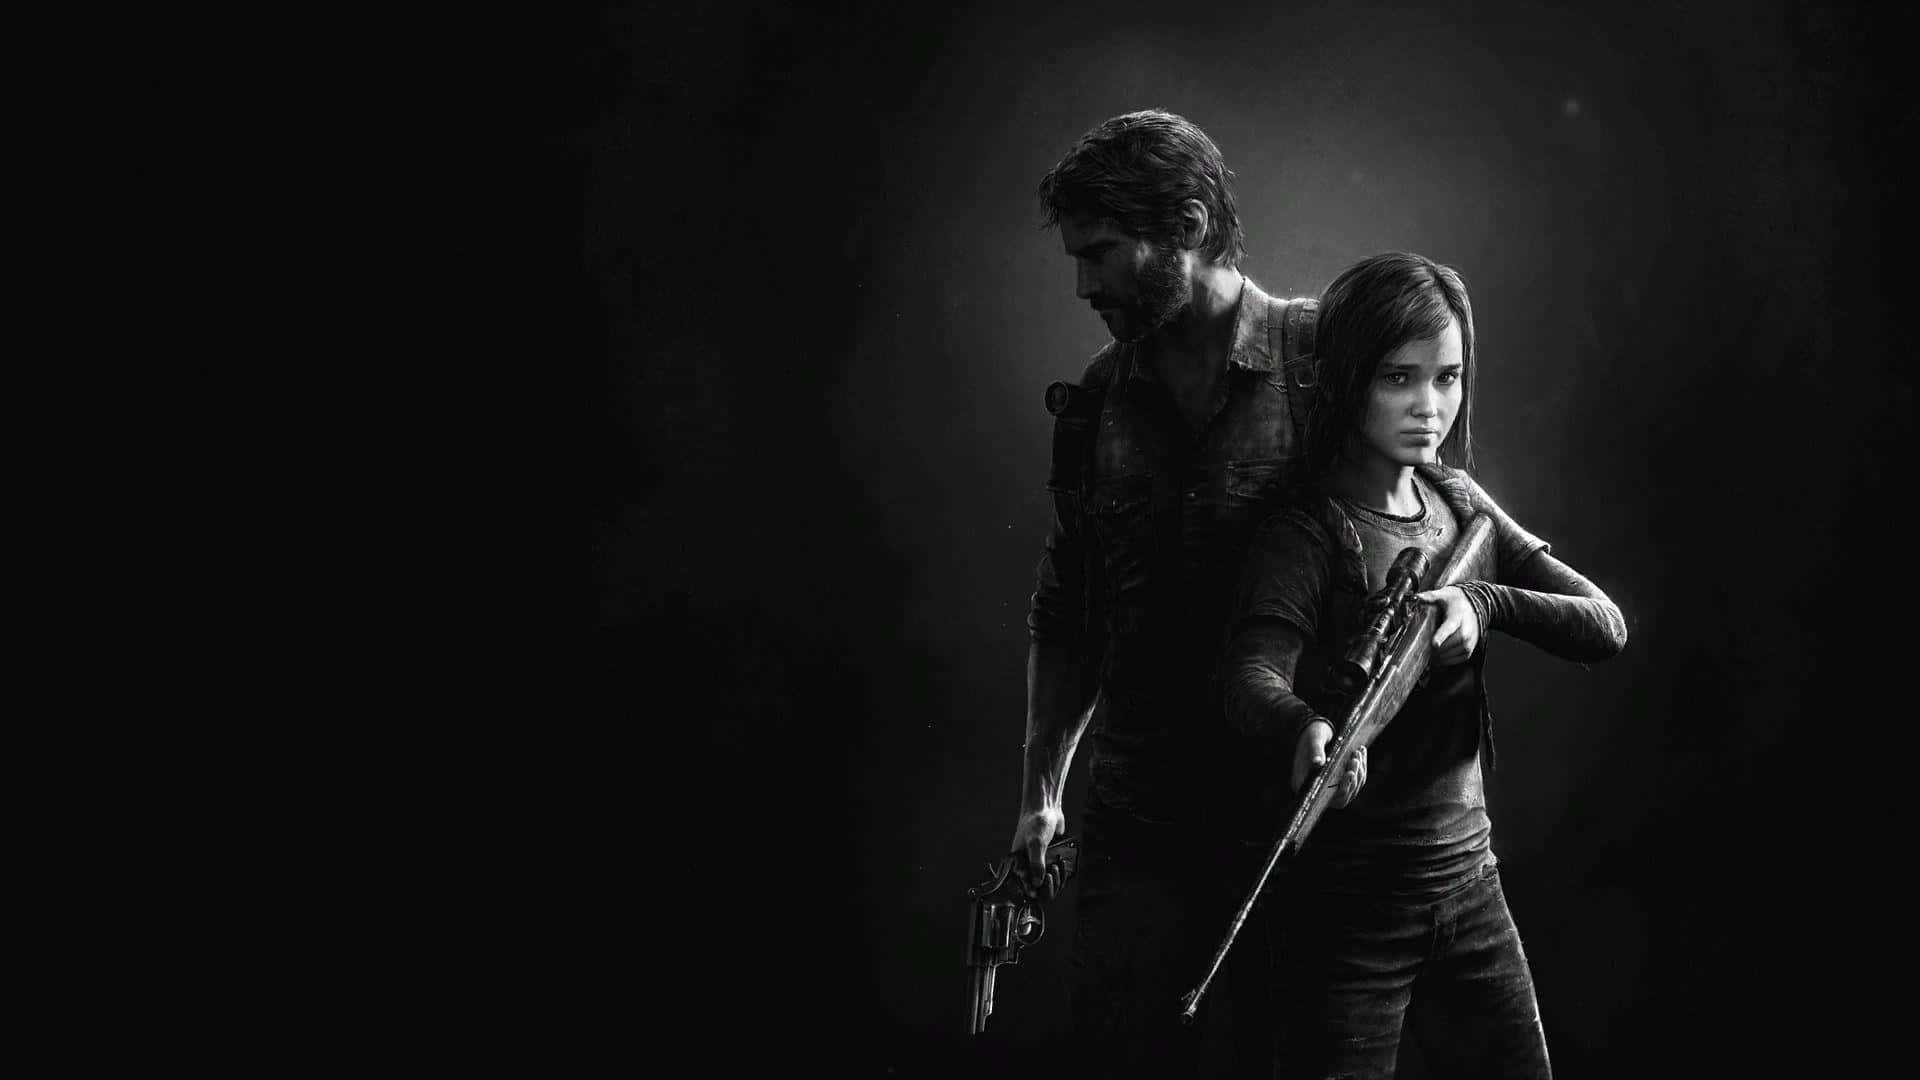 Ellie and Joel journey through a desolate post-apocalyptic world in The Last of Us.